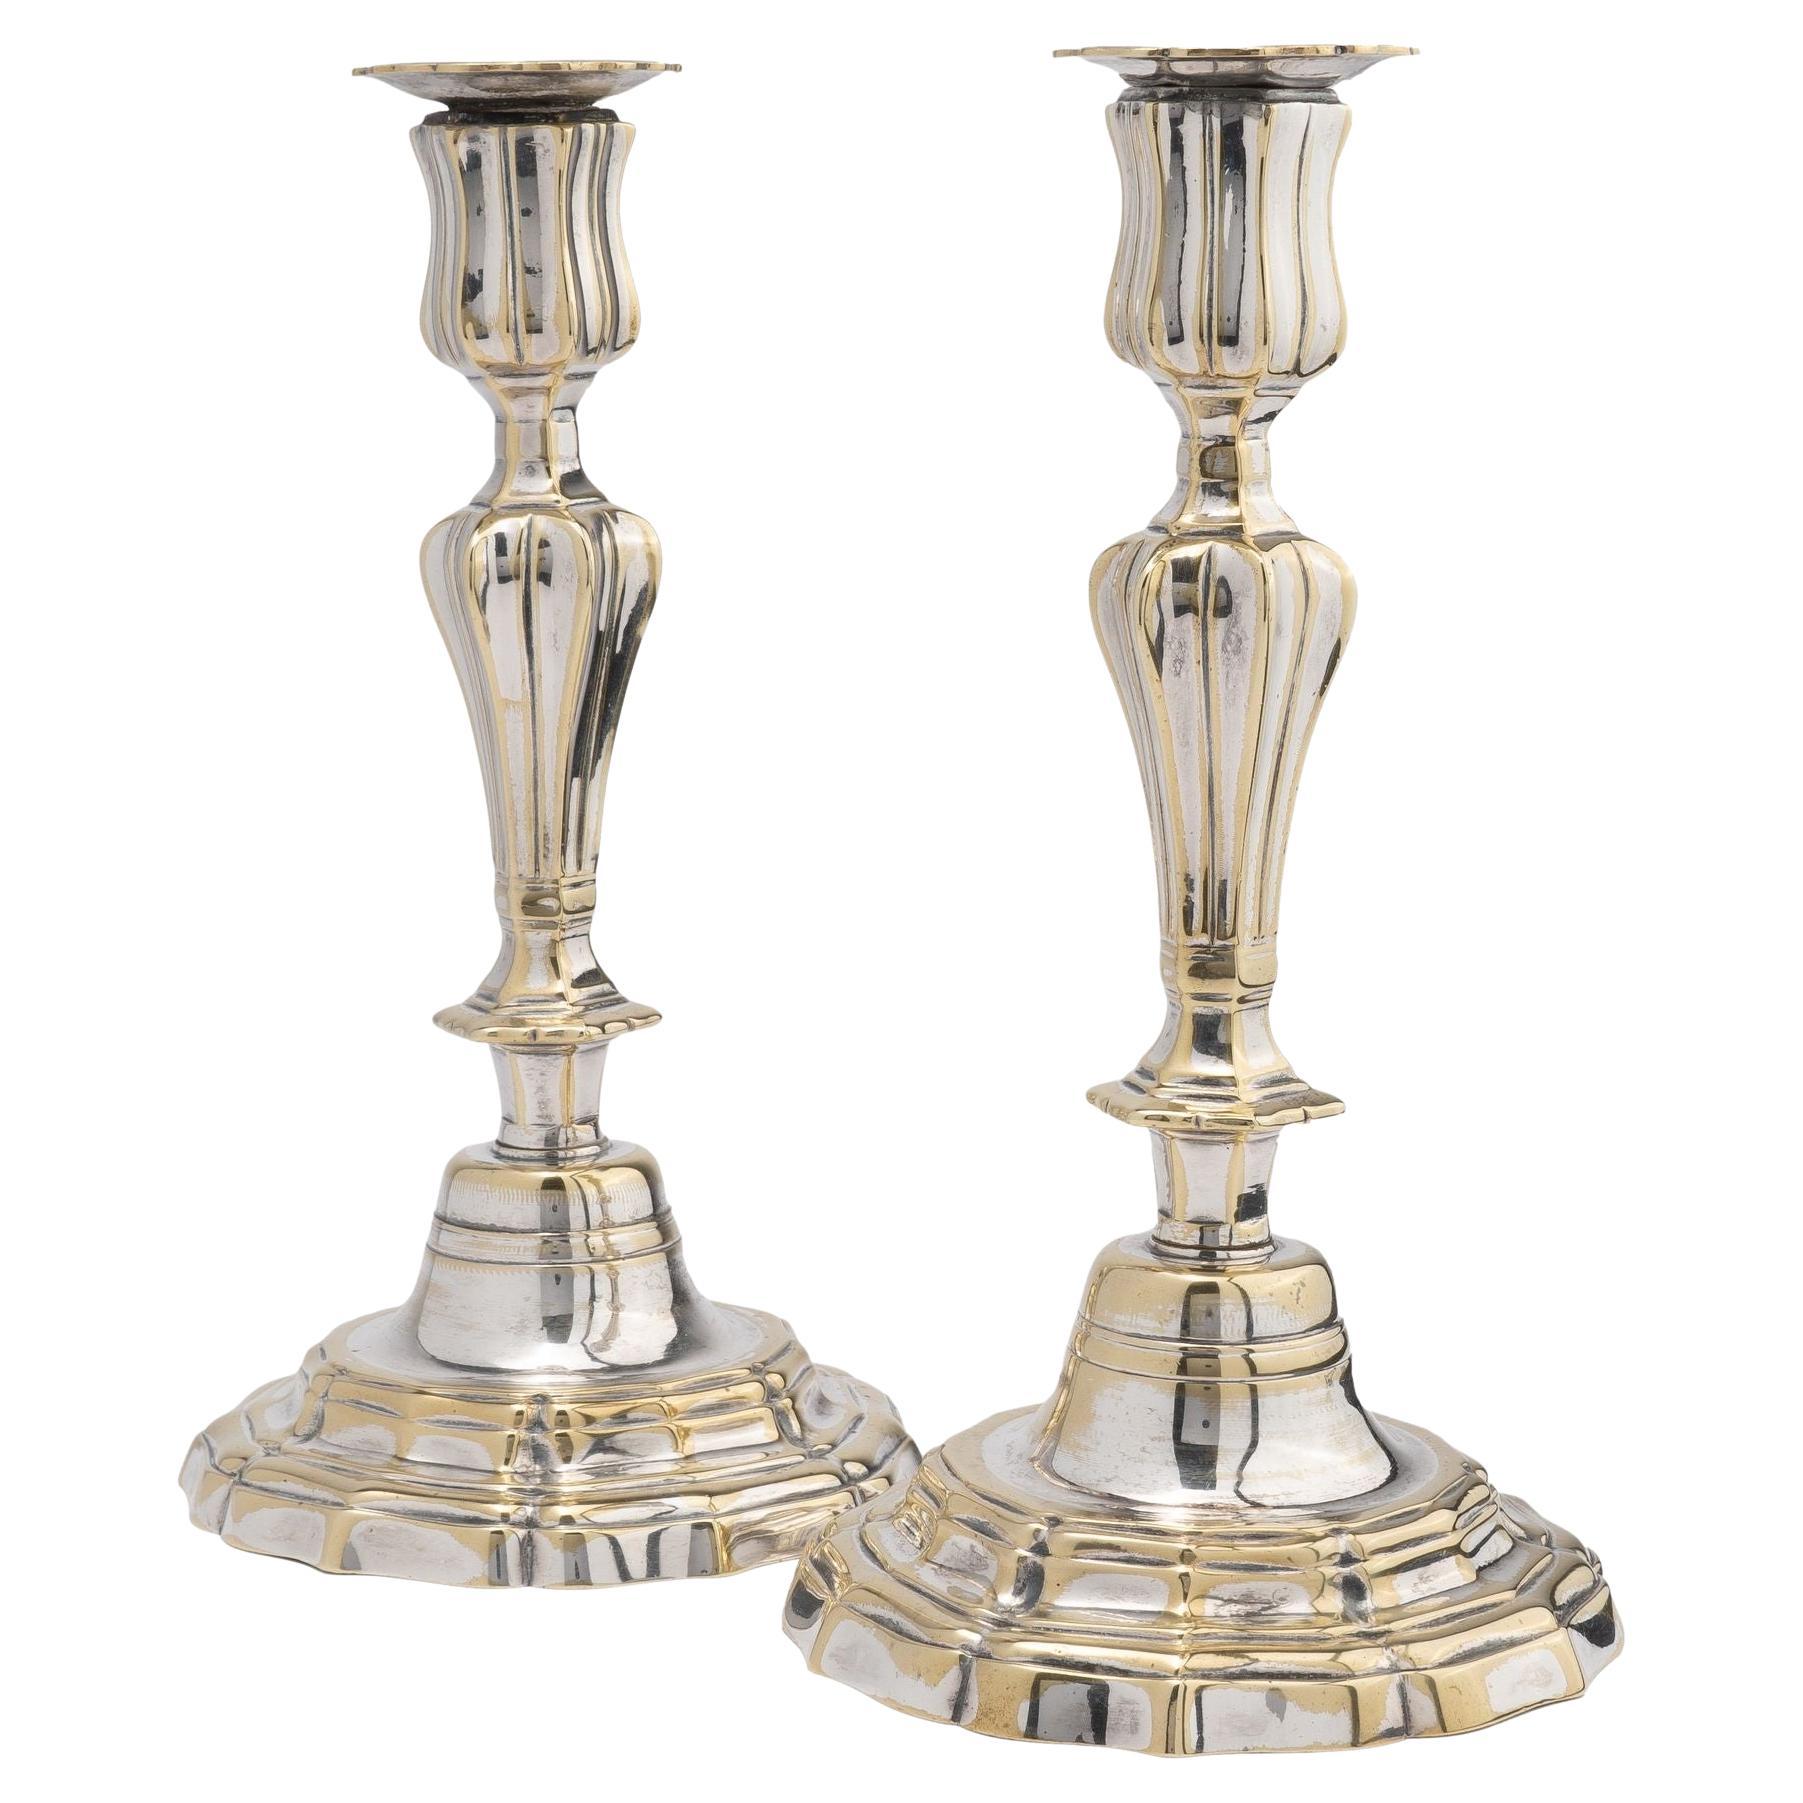 Pair of French Silvered Cast Brass Candlesticks, 1720